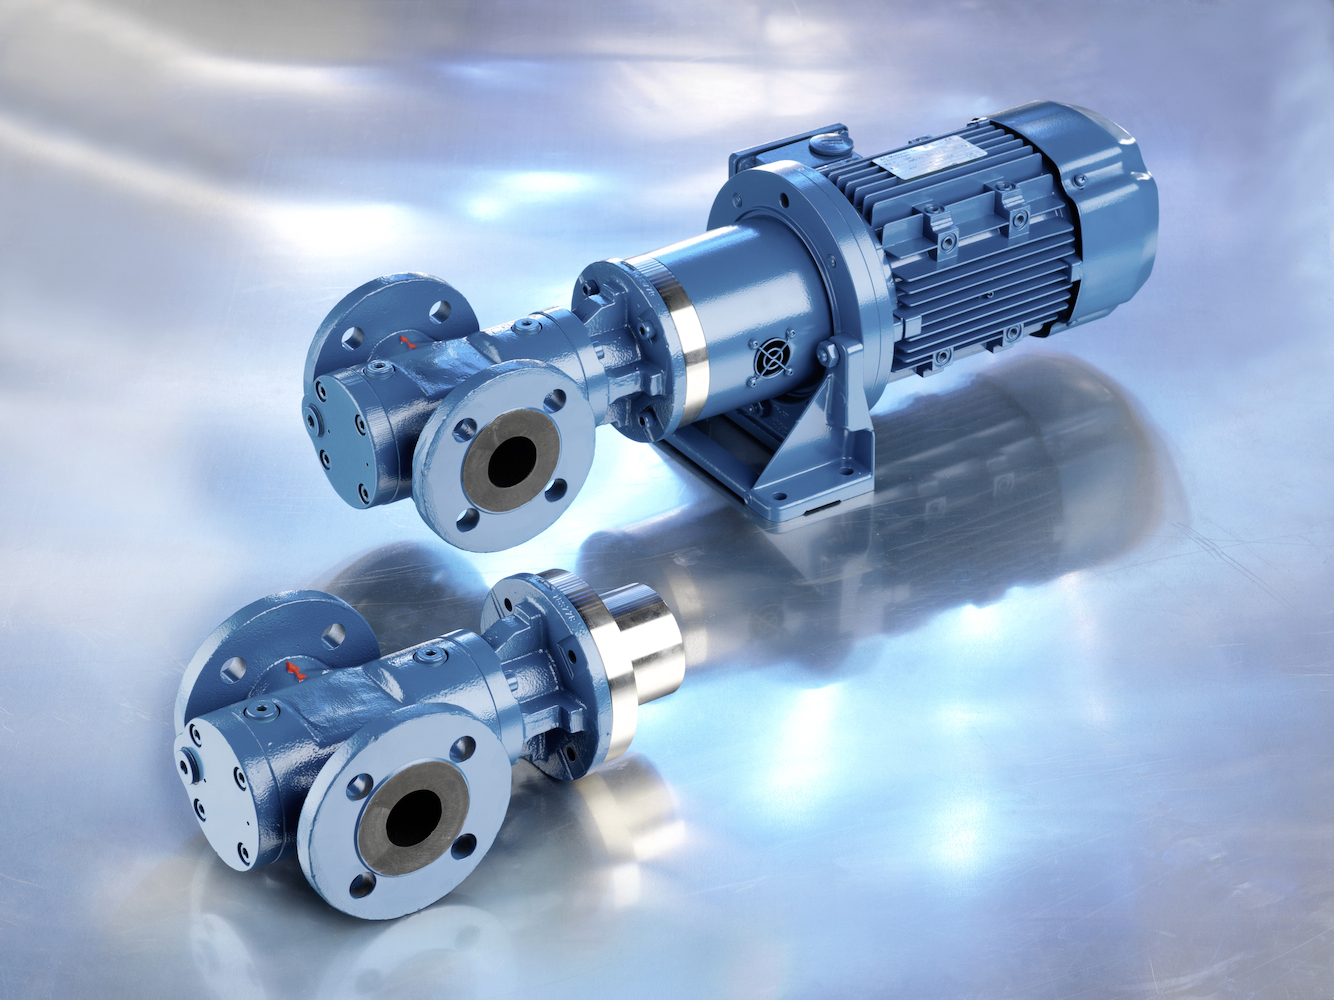 kaptajn Holde styrte Magnetic Coupling Meets Challenging High Inlet Pressure Lube oil Pump  Applications - Empowering Pumps and Equipment